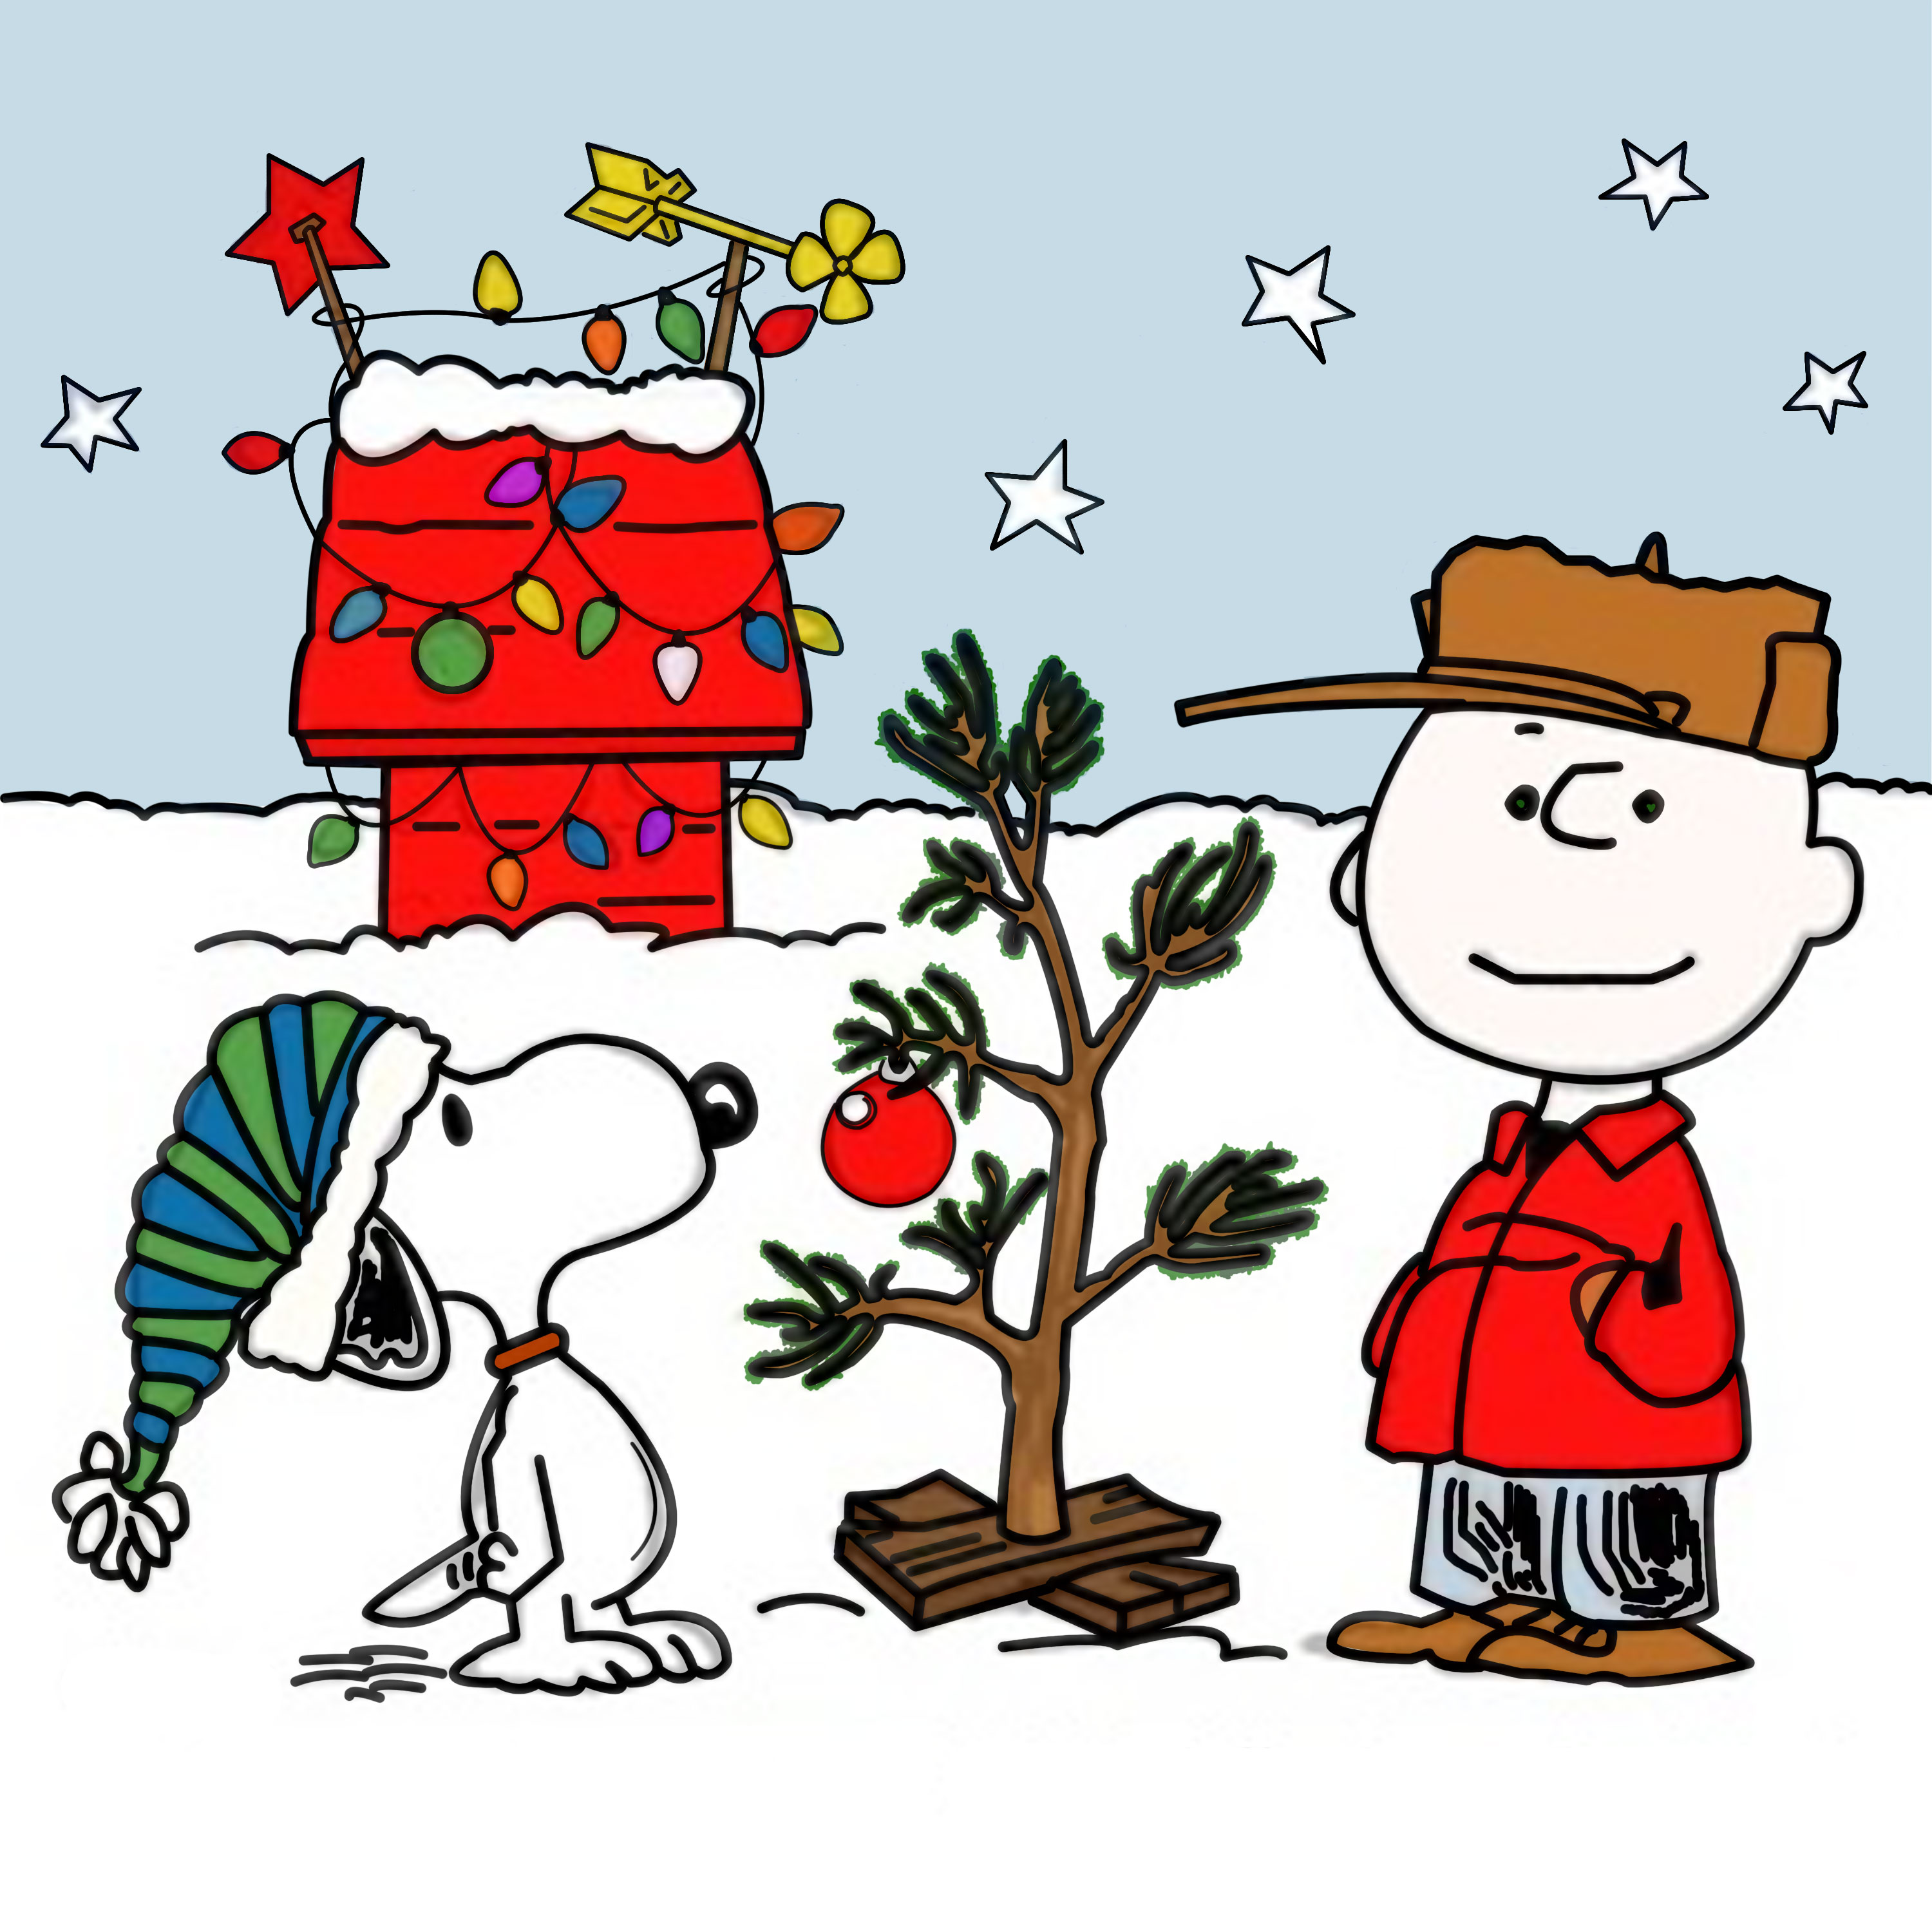 Charlie Brown Peanuts Ics Snoopy Christmas Ry Wallpaper Background